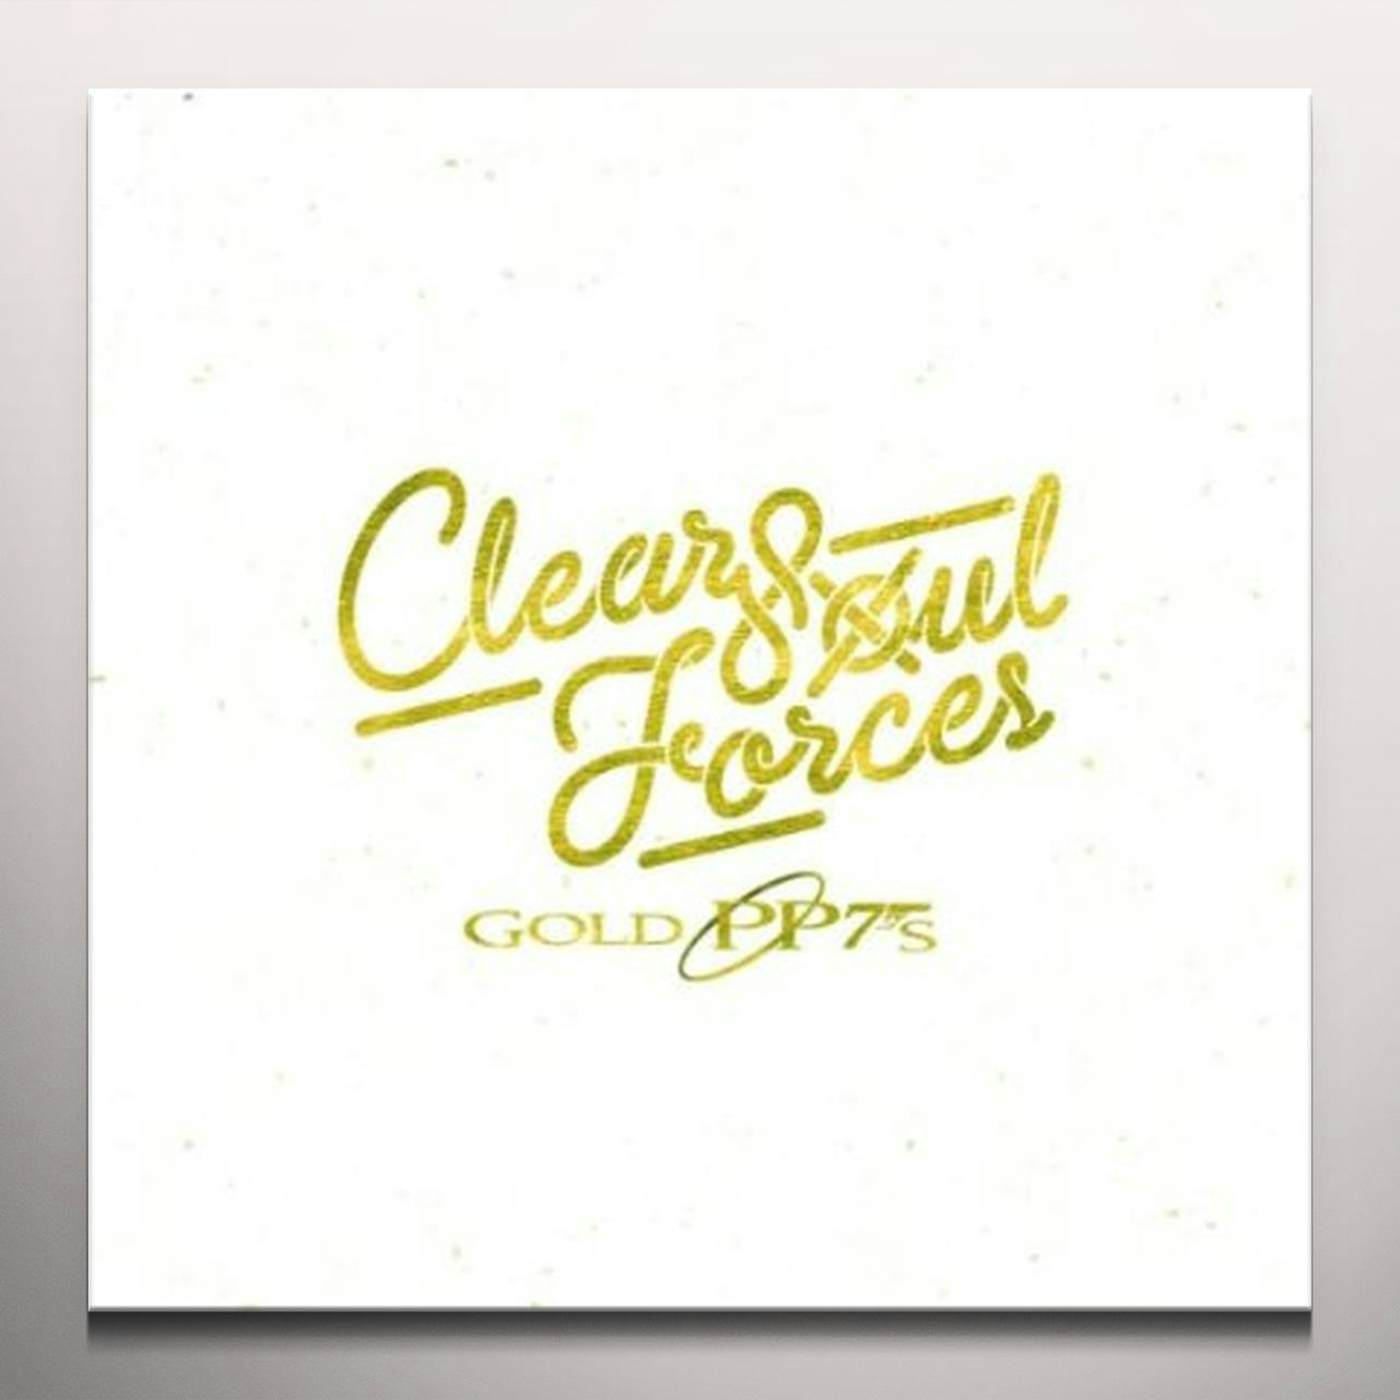 Clear Soul Forces Gold PP7s Vinyl Record